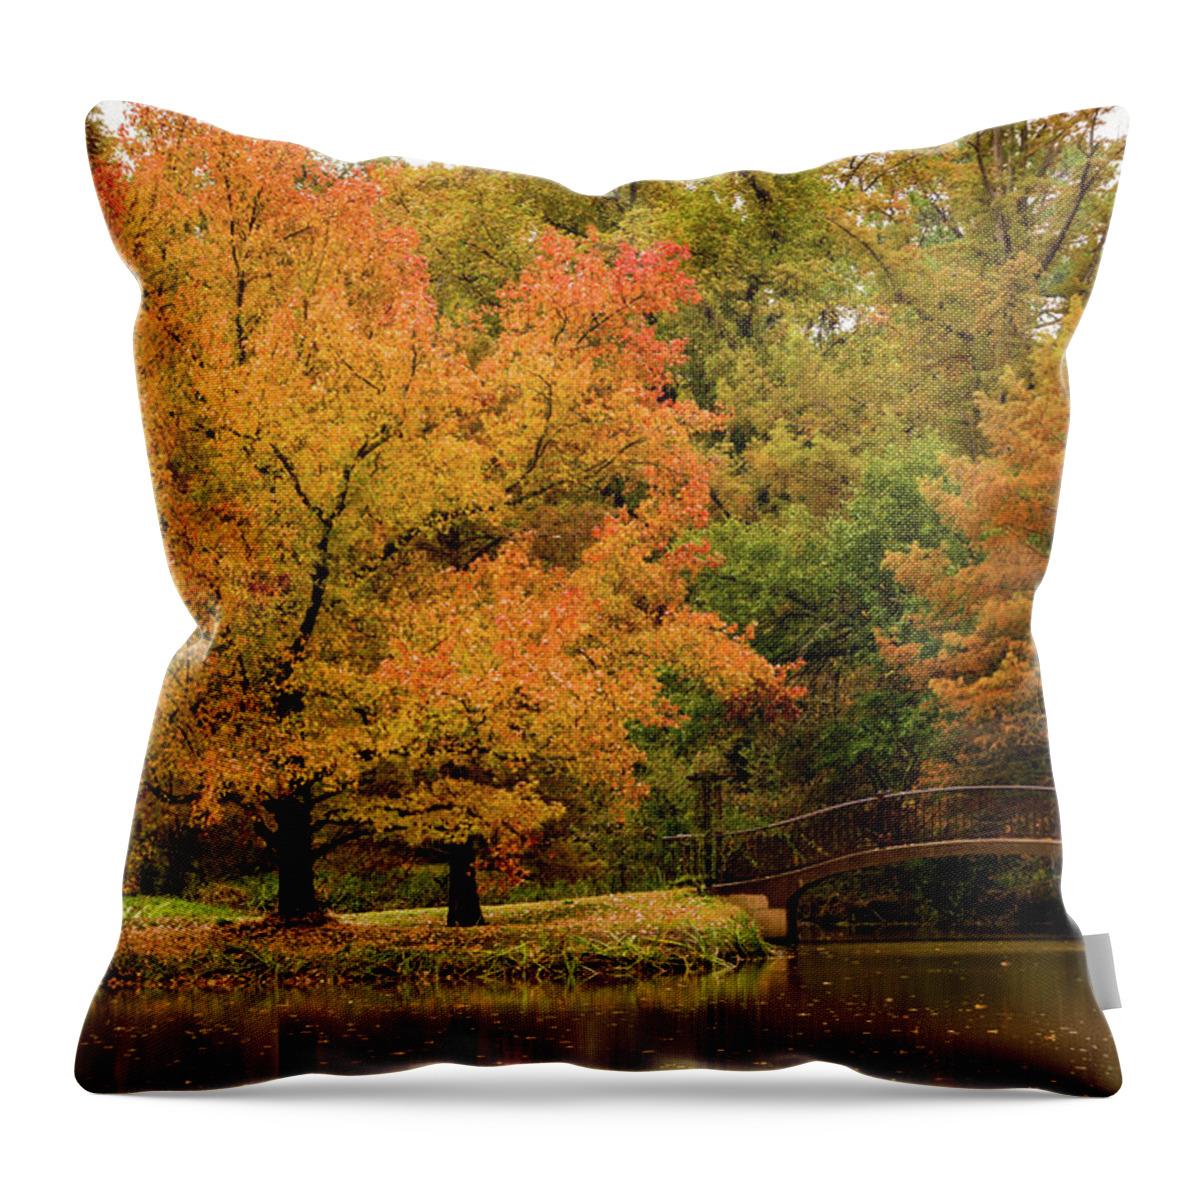 Jay Stockhaus Throw Pillow featuring the photograph Fall at the Arboretum by Jay Stockhaus